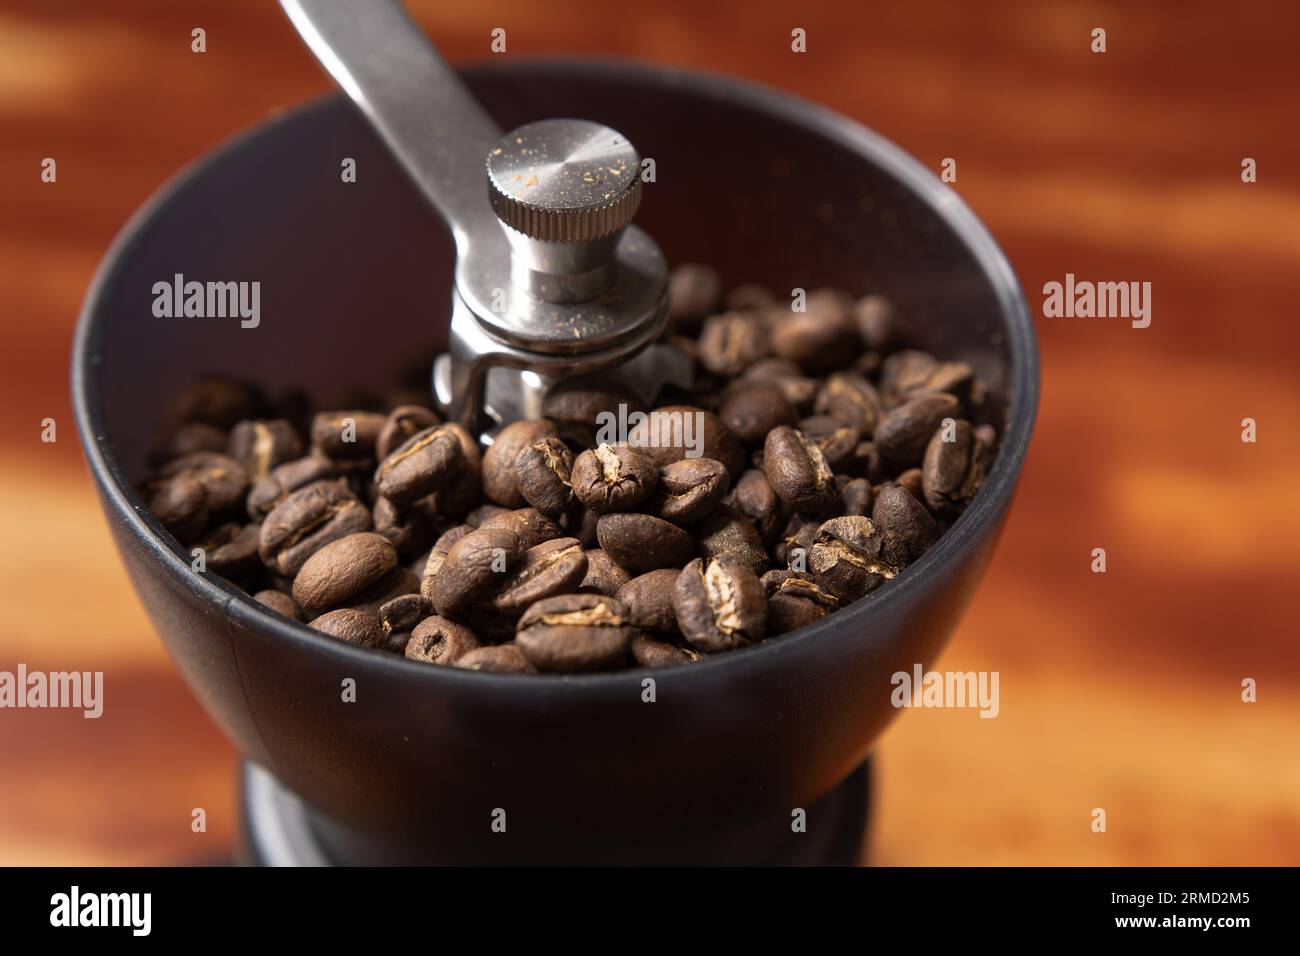 Roasted coffee beans in a coffee grinder Stock Photo